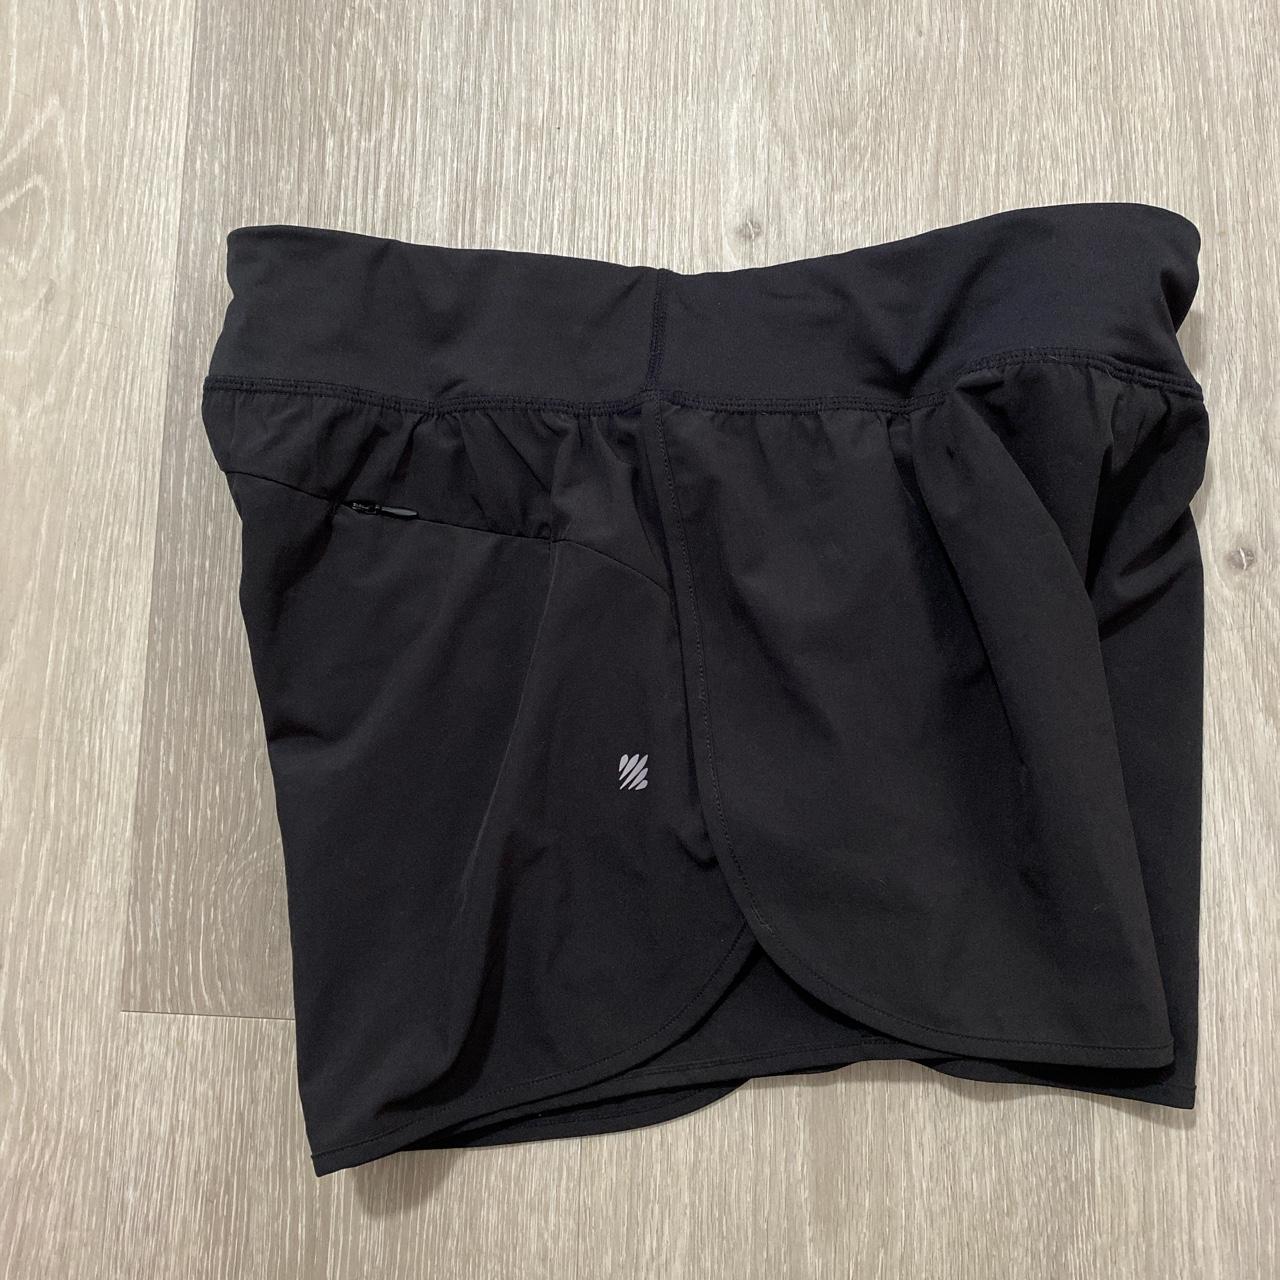 ELL and VOO 2 in 1 shorts - Depop